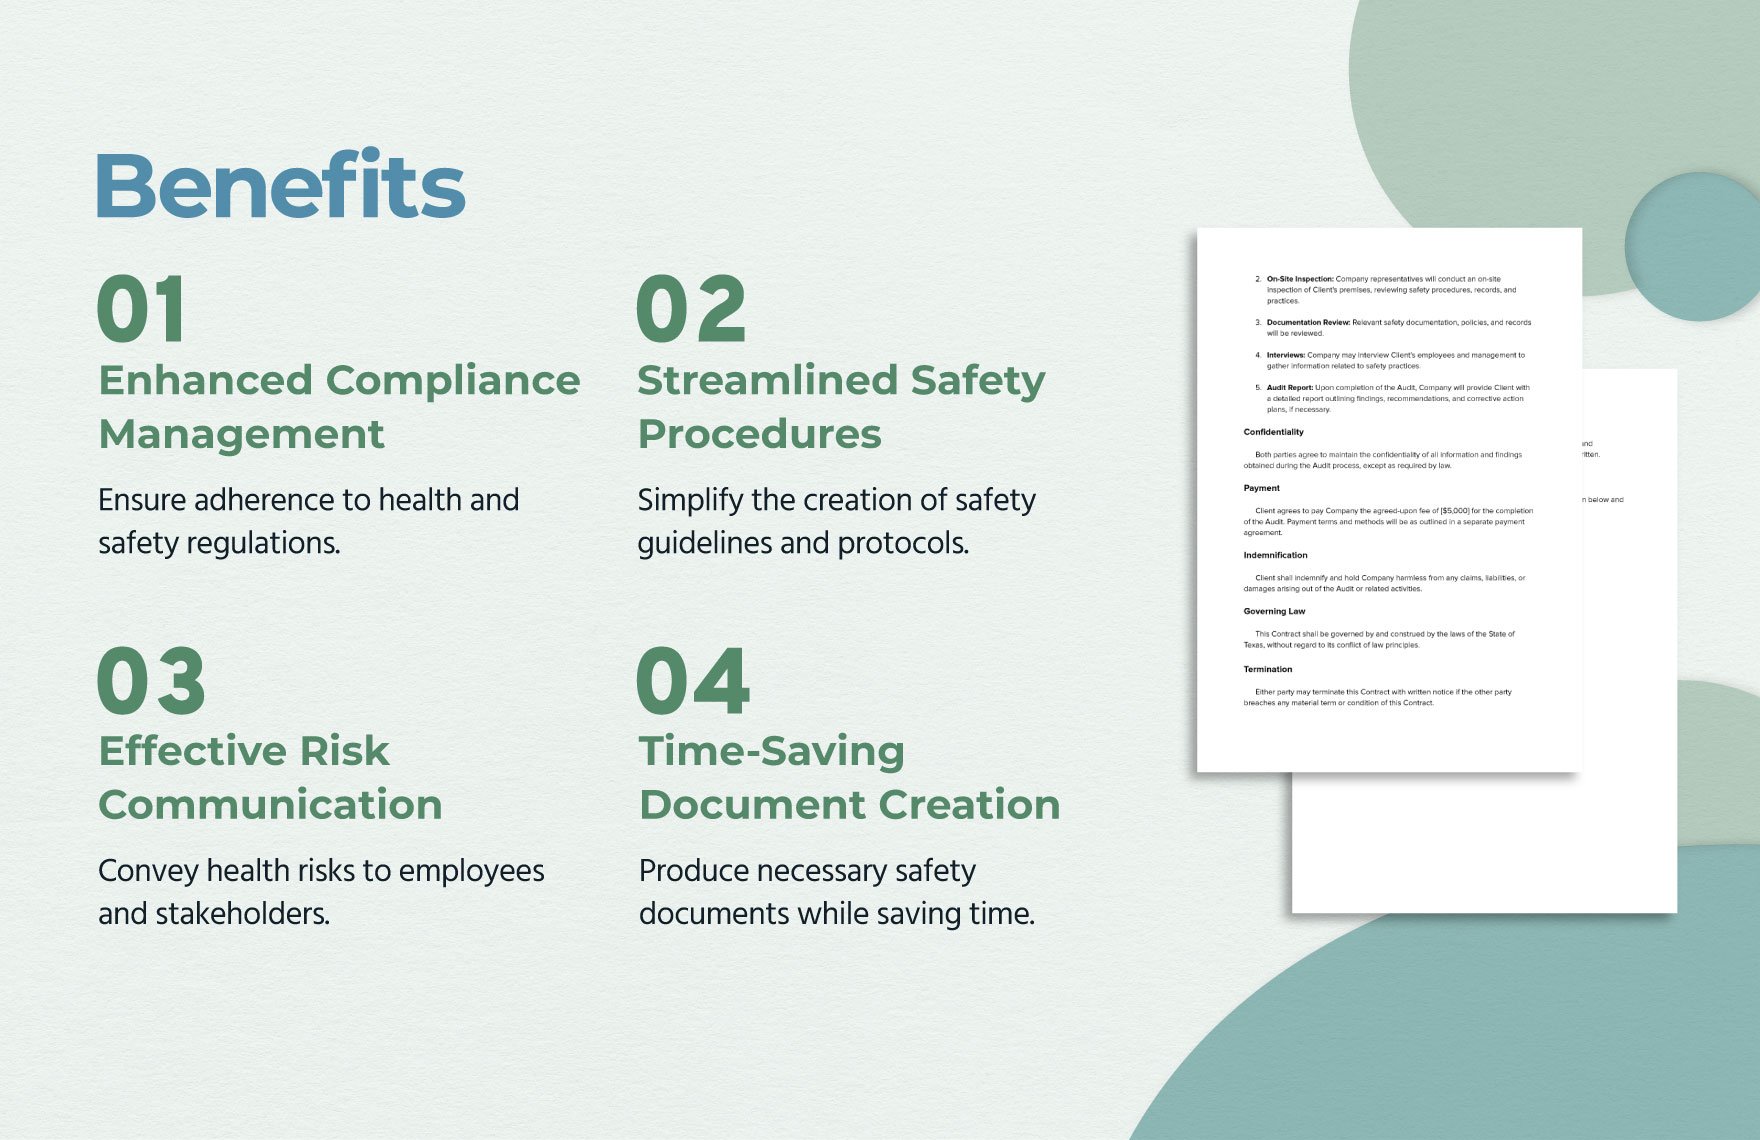 Safety Audit Contract Template